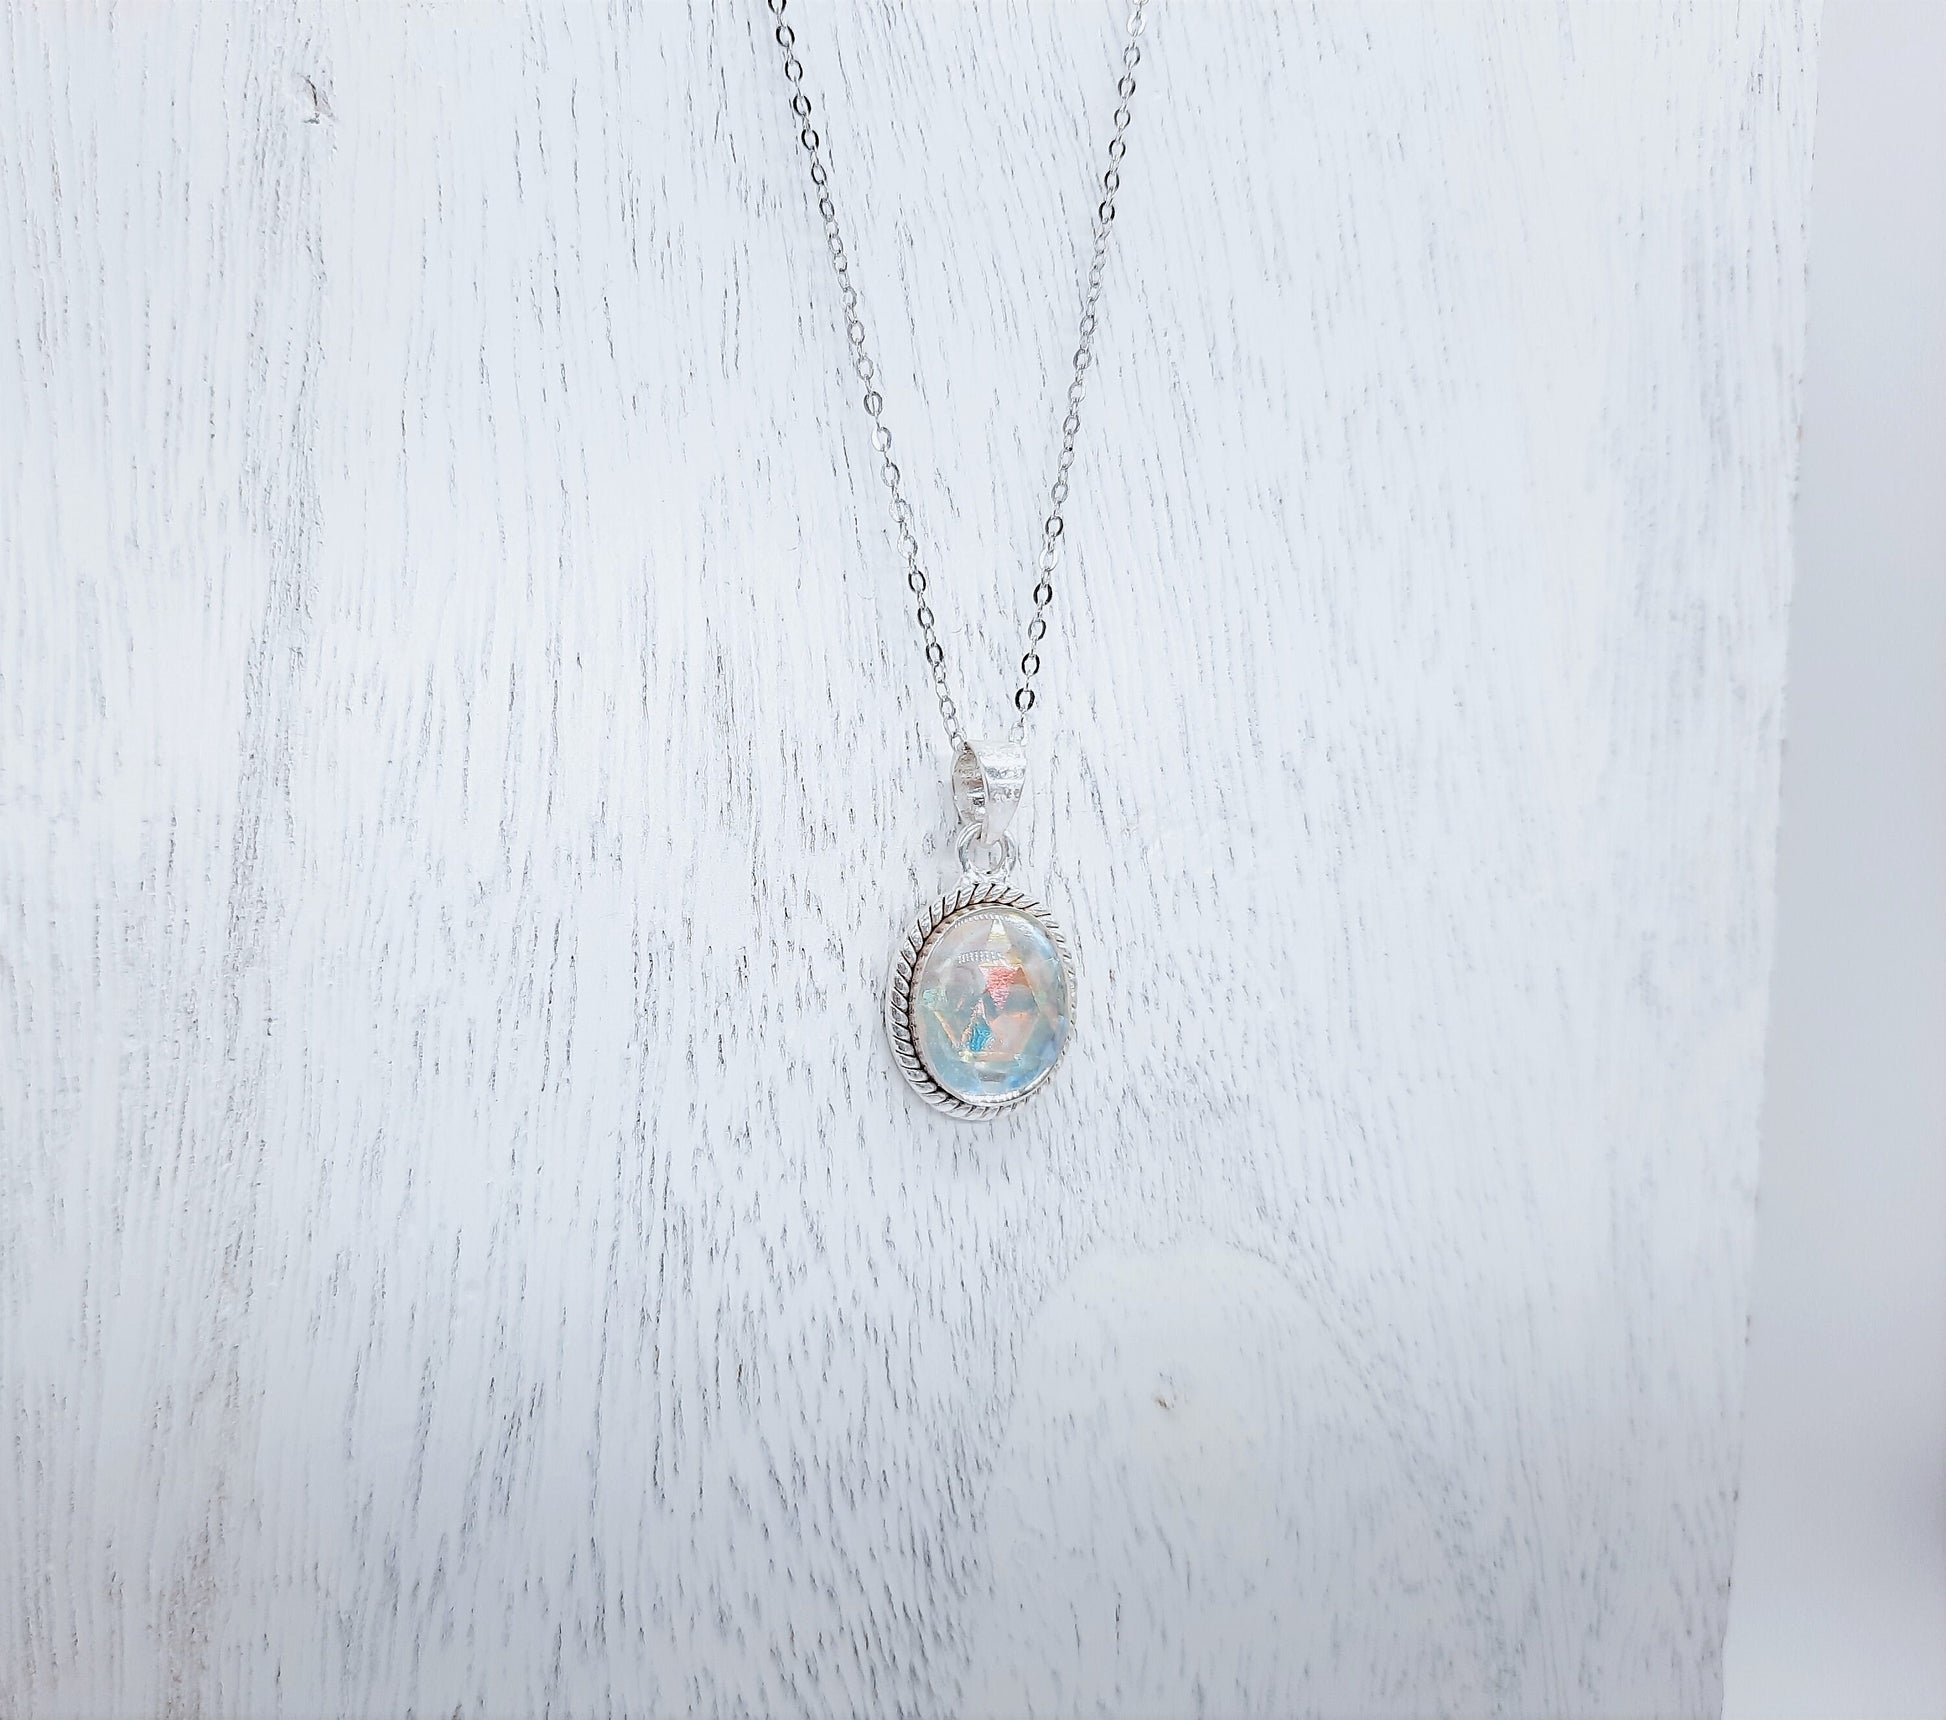 Handcrafted Multifaceted Vintage Aurora Borealis Glass Cabochon Pendant Necklace, Domed with Mica Infused Resin, 925 Sterling Silver